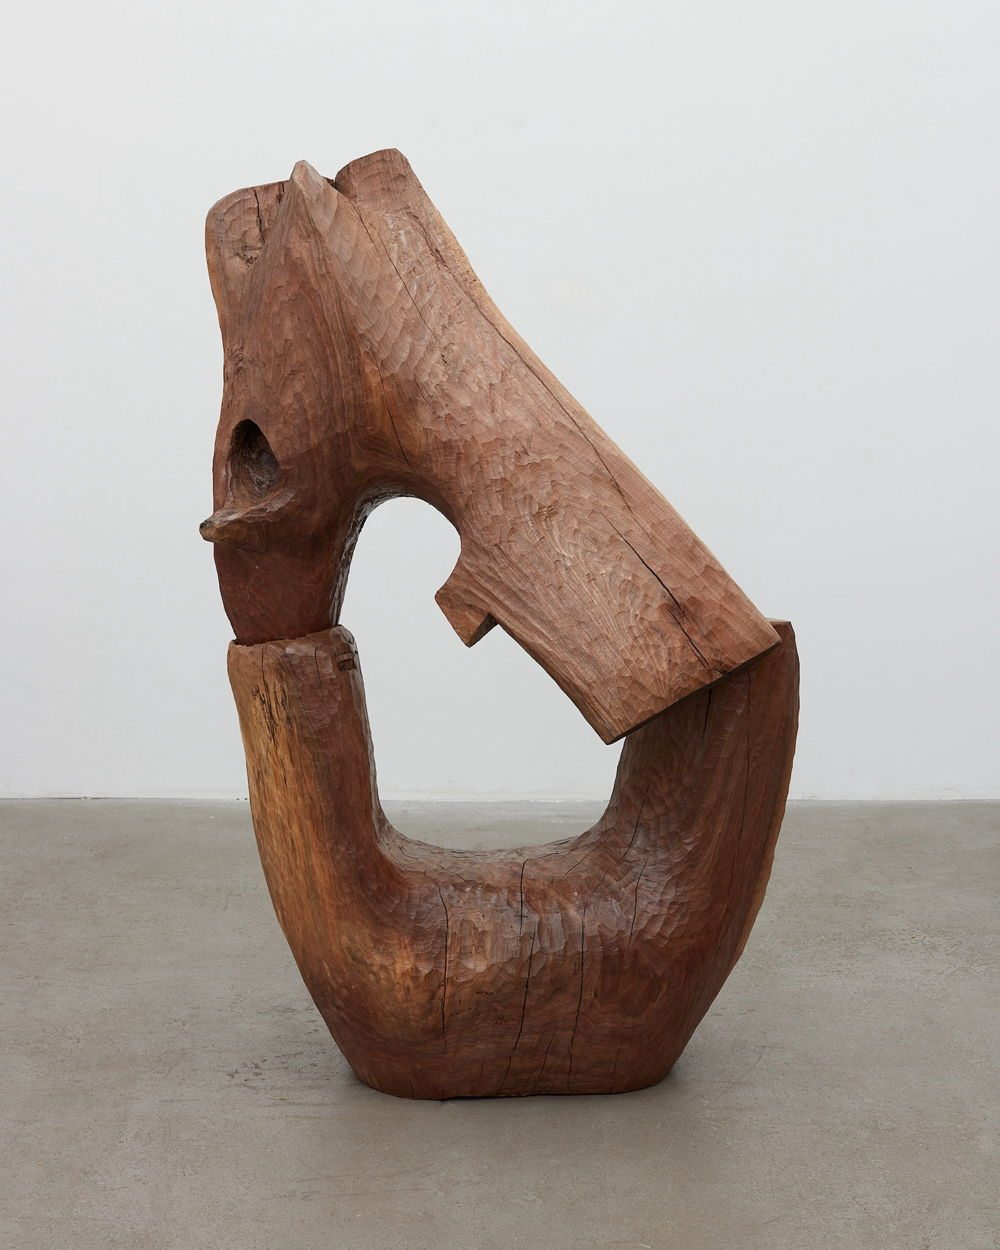 Photo of a wooden sculpture formed of two curved pieces of wood resting together in a keyhole shape. Carving marks and woodgrain are visible on the surface.